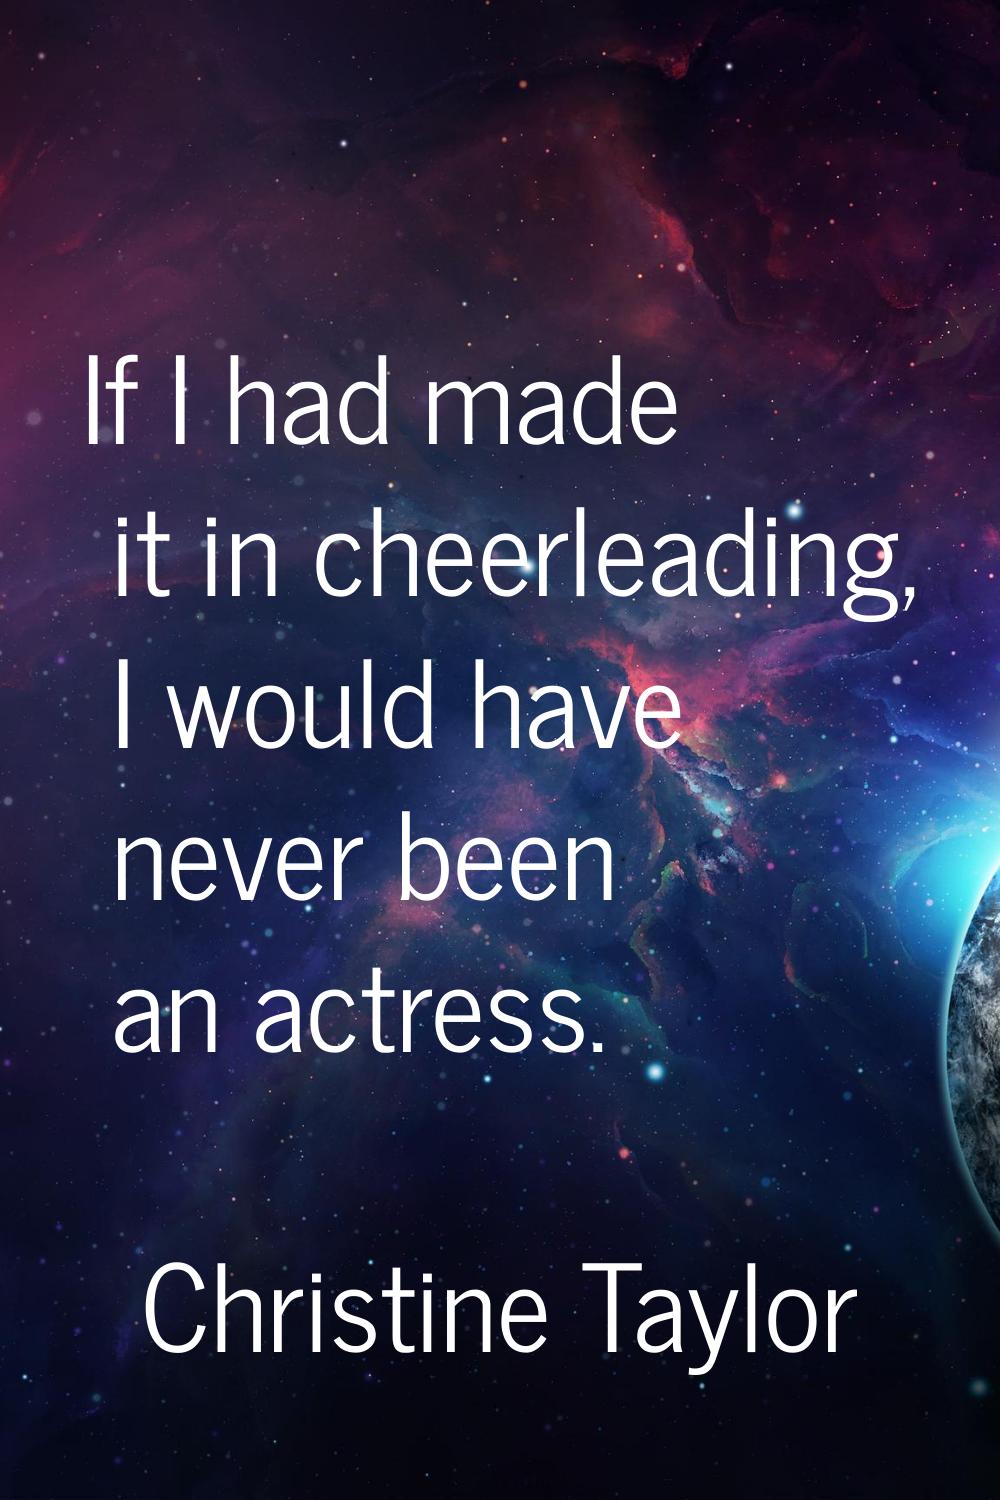 If I had made it in cheerleading, I would have never been an actress.